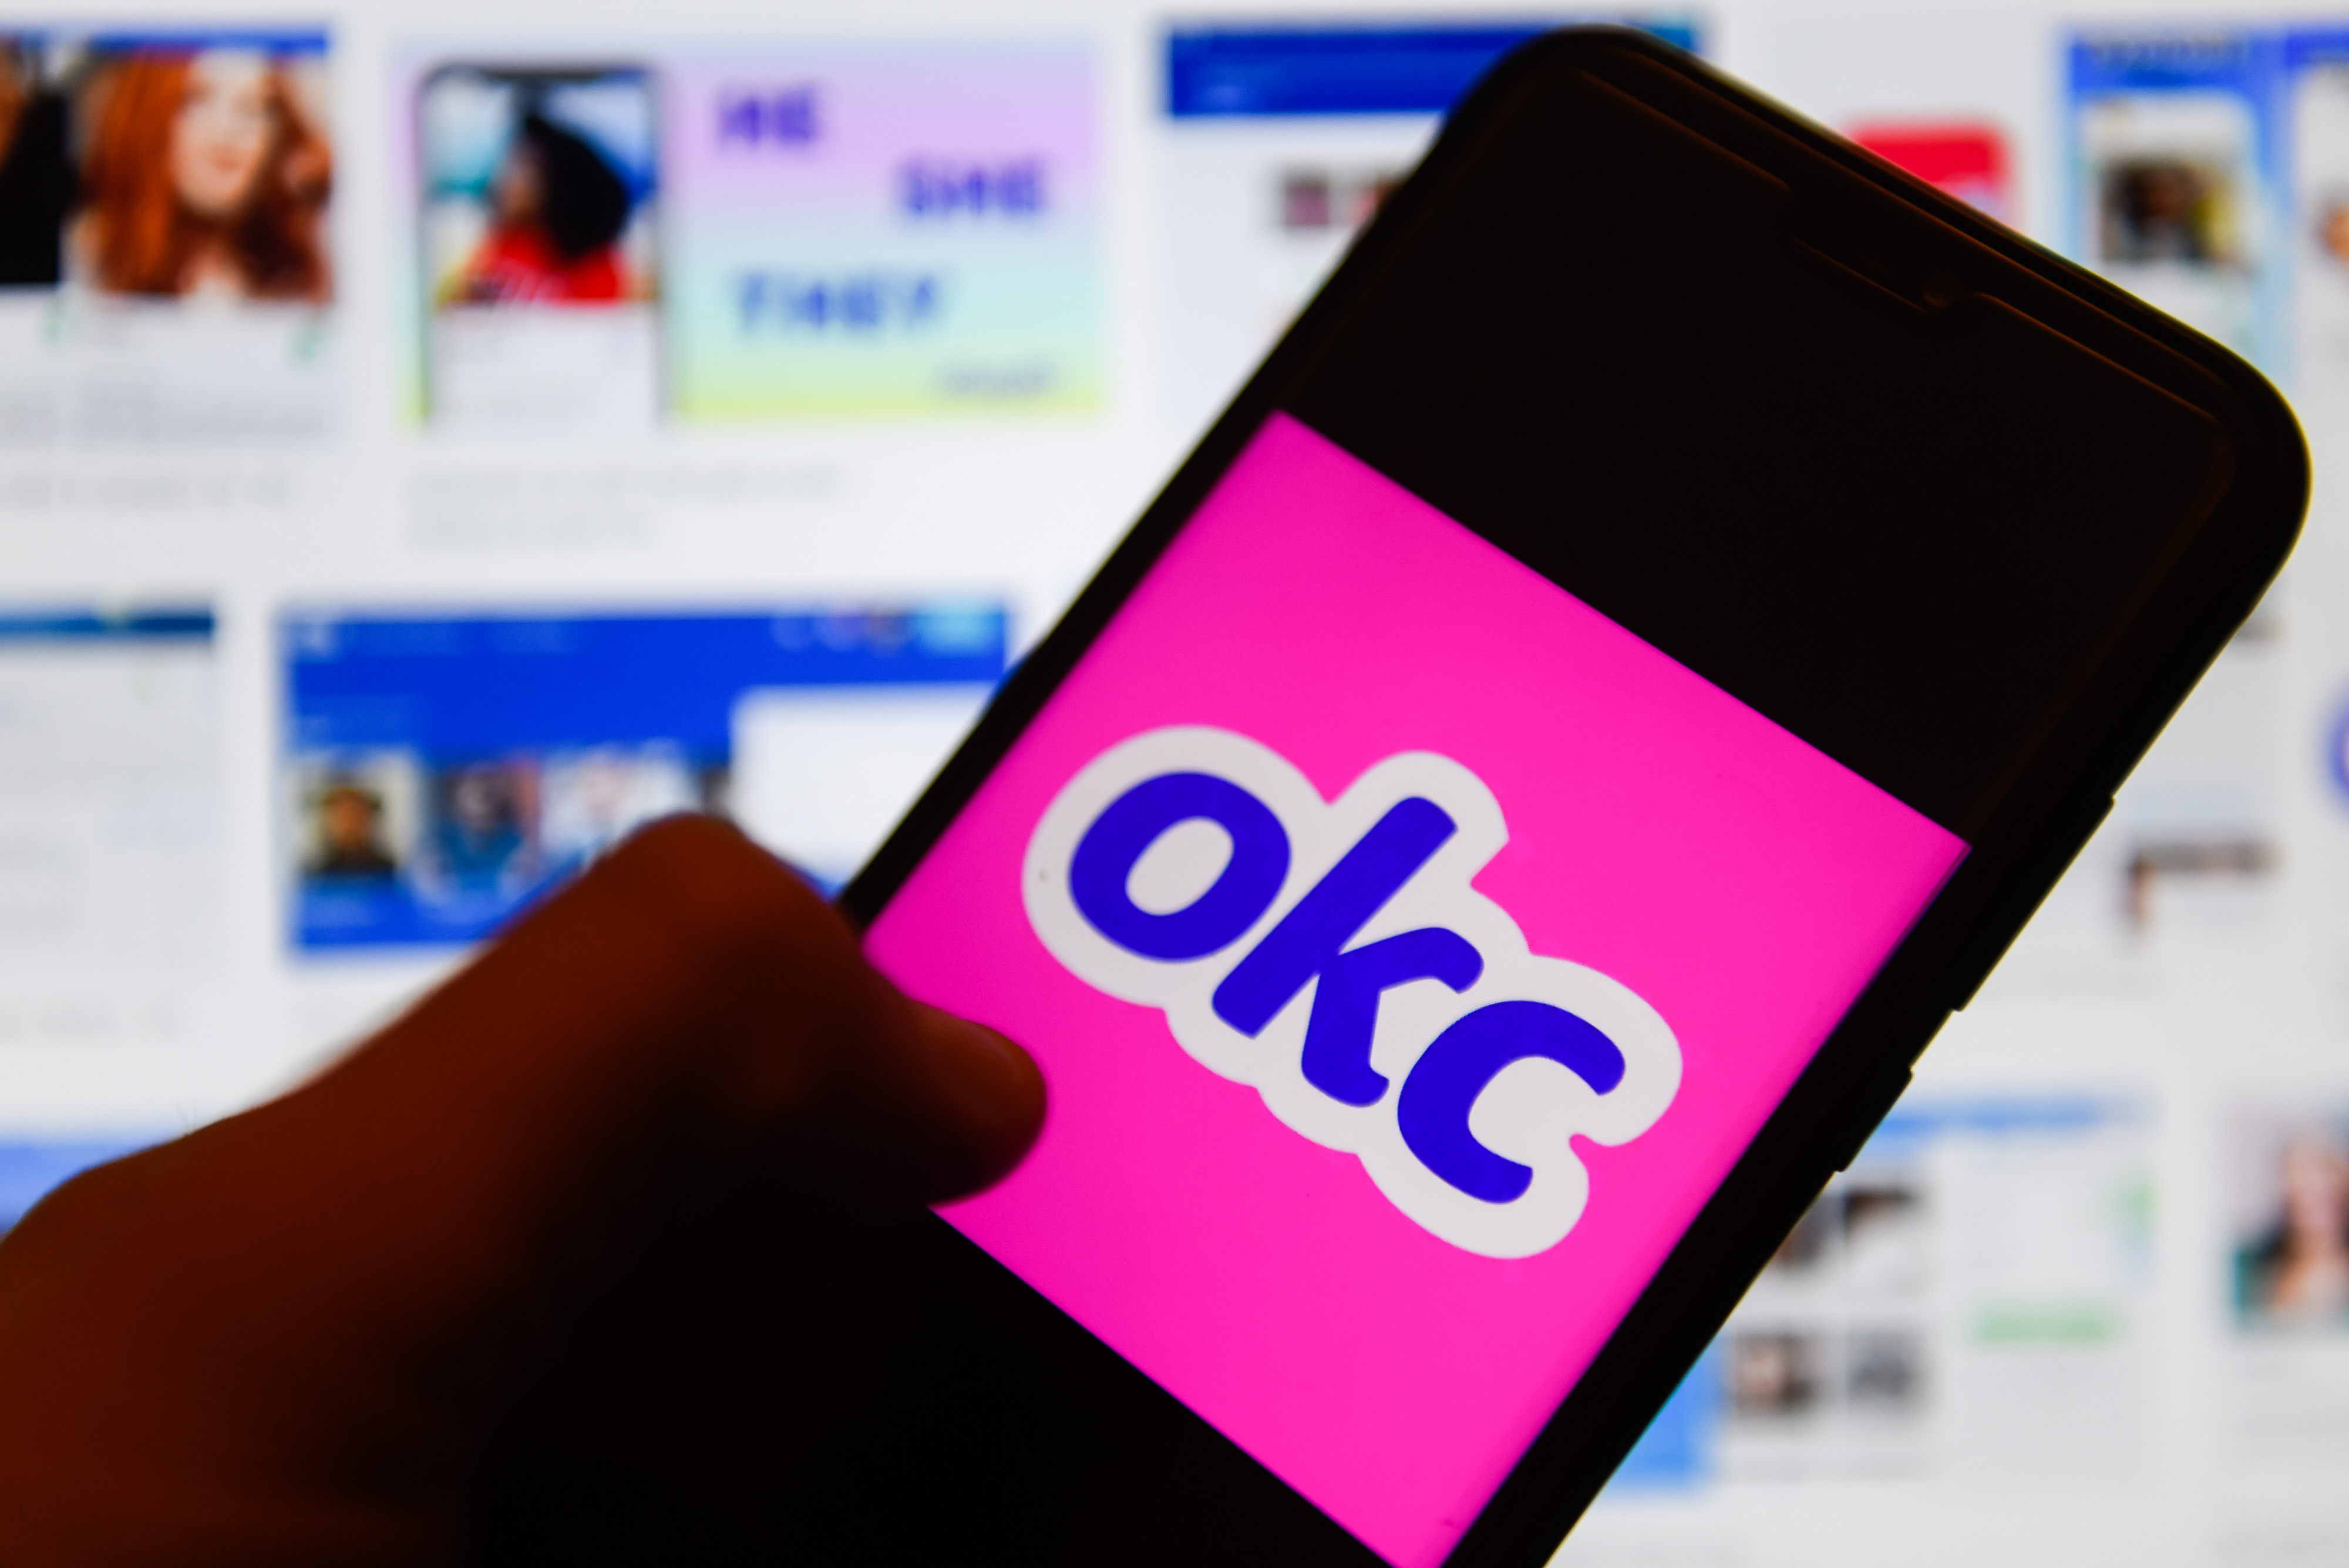 Researchers just released profile data on 70,000 OkCupid users without permission